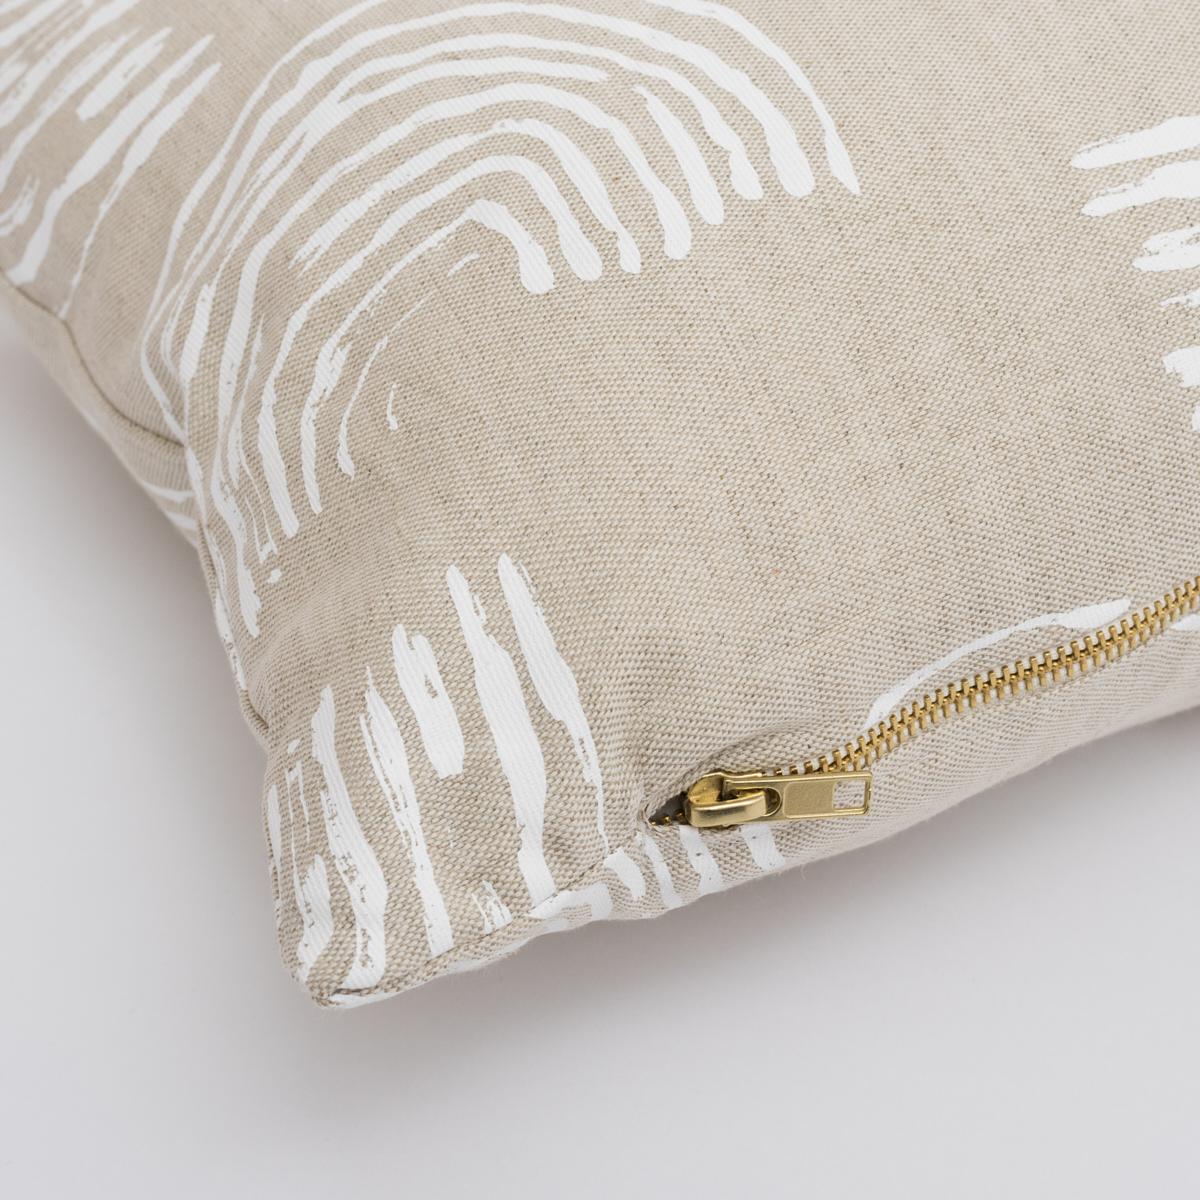 This pillow features Squiggles by Caroline Z Hurley with a knife edge finish. The repeated rainbow-shaped curves of this ivory-on-natural fabric's loose, painterly pattern are printed on a linen-cotton-blend fabric. Pillow includes a feather/down